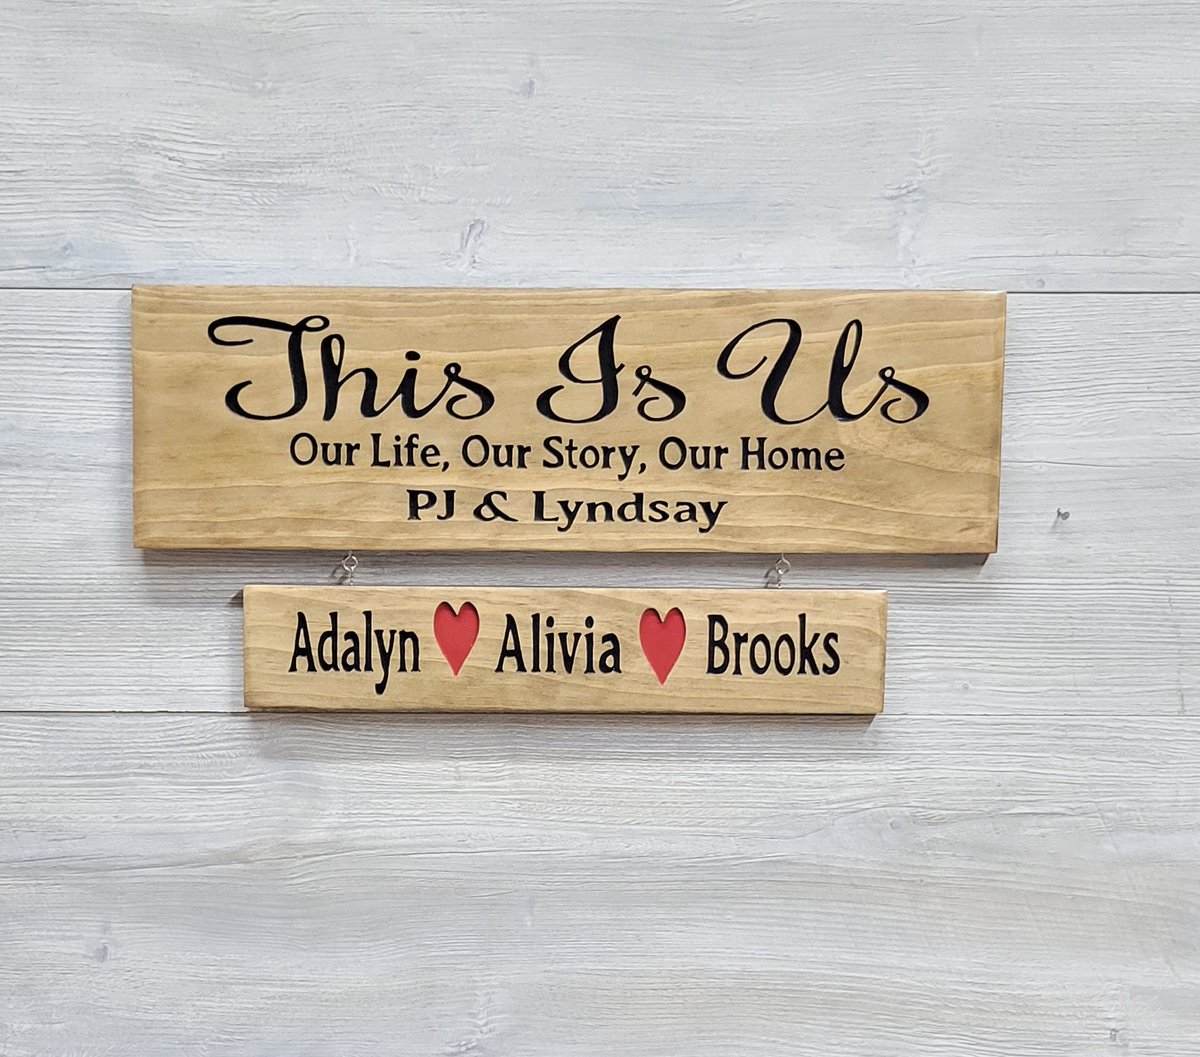 This is us Hand carved wooden sign with optional Kids - grand kids add on
#Thisisus #Farmhousewalldecor #Anniversarygift #Couplesgift #Cottagcoredecor #PFPWoodDesign #handcarvedsign